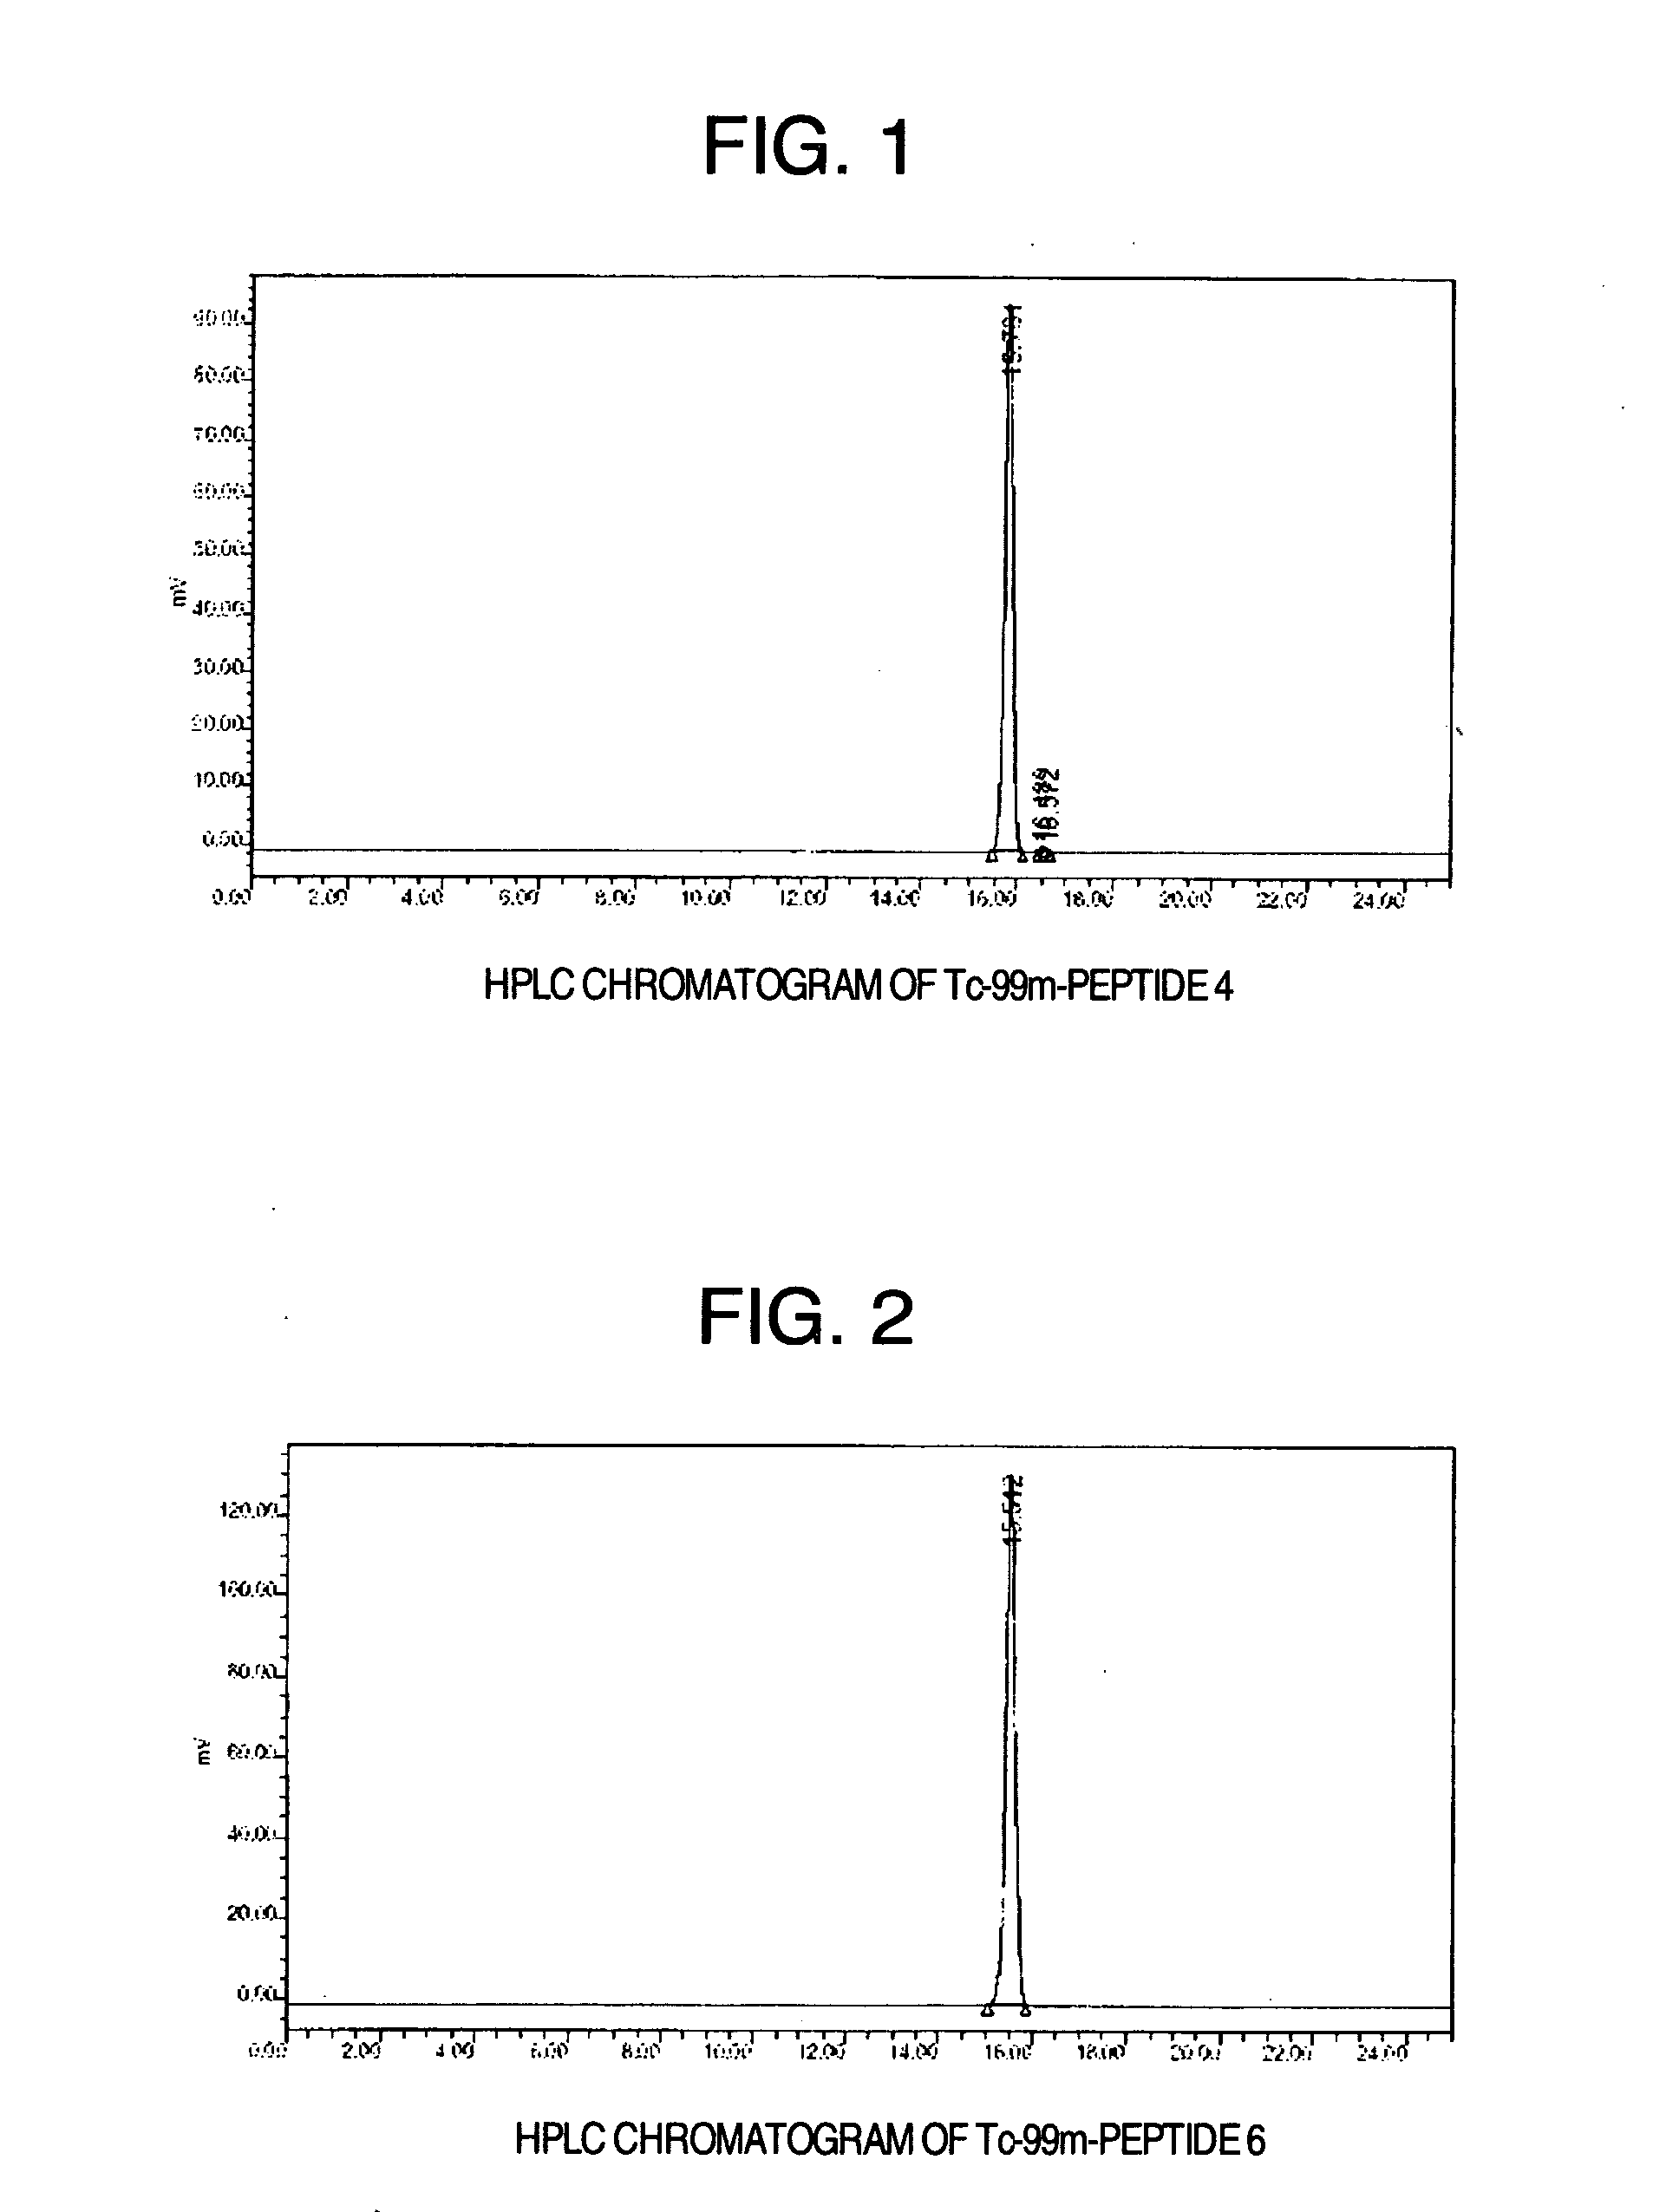 Compound binding to leukocytes and medicinal composition containing the compound in labeled state as the active ingredient